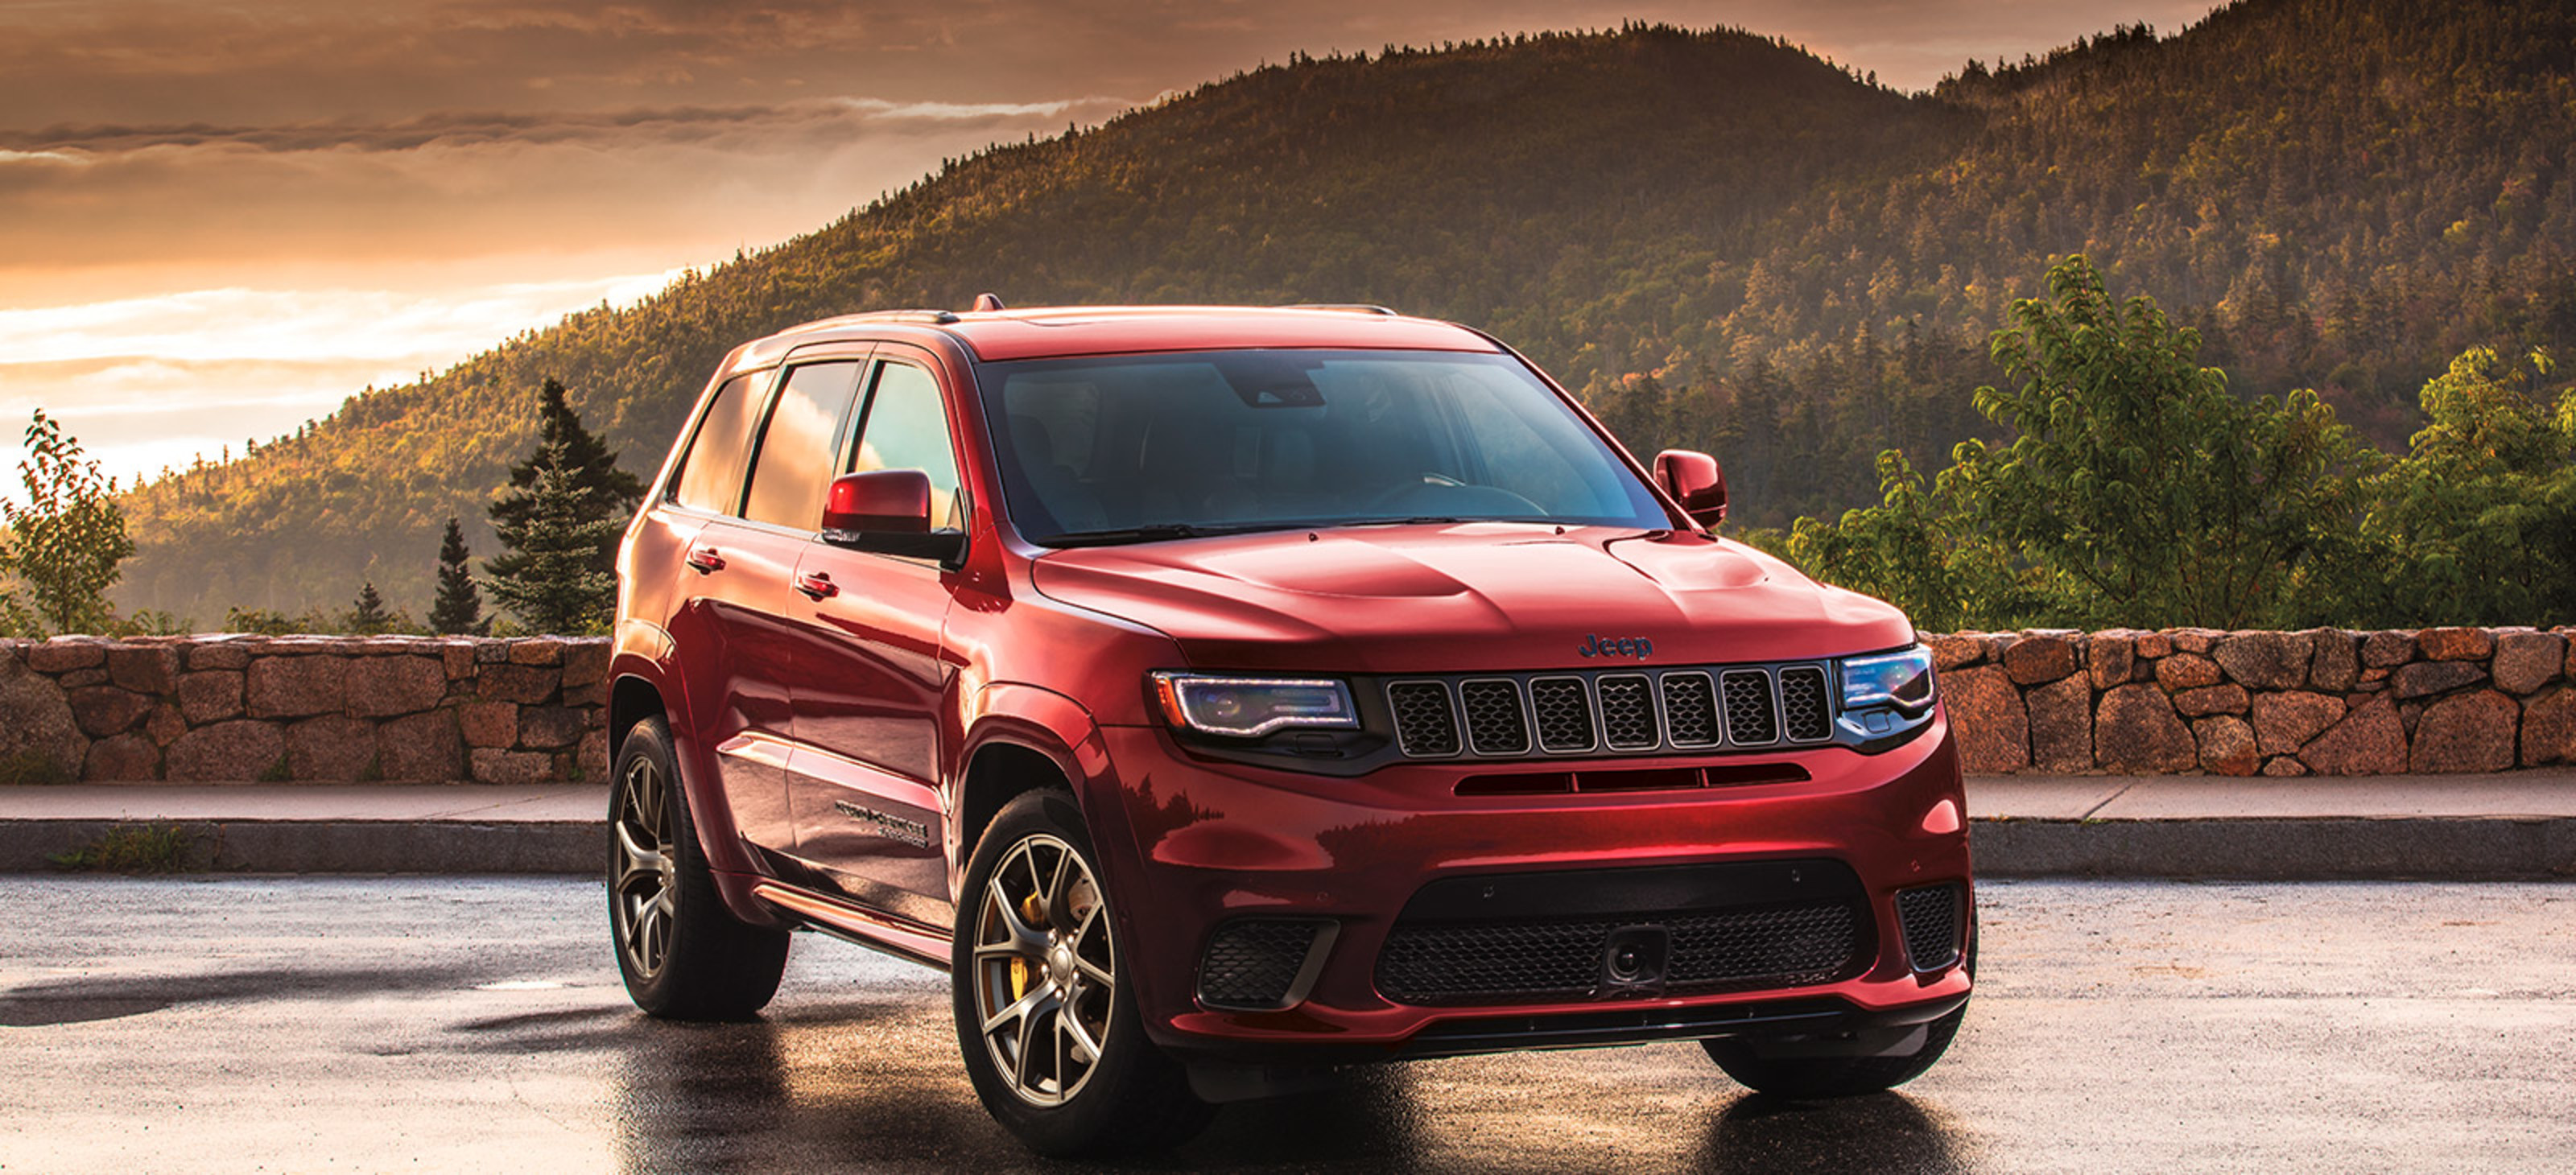 Front quarter view of a red  2021 Grand Cherokee Trackhawk parked on a road
